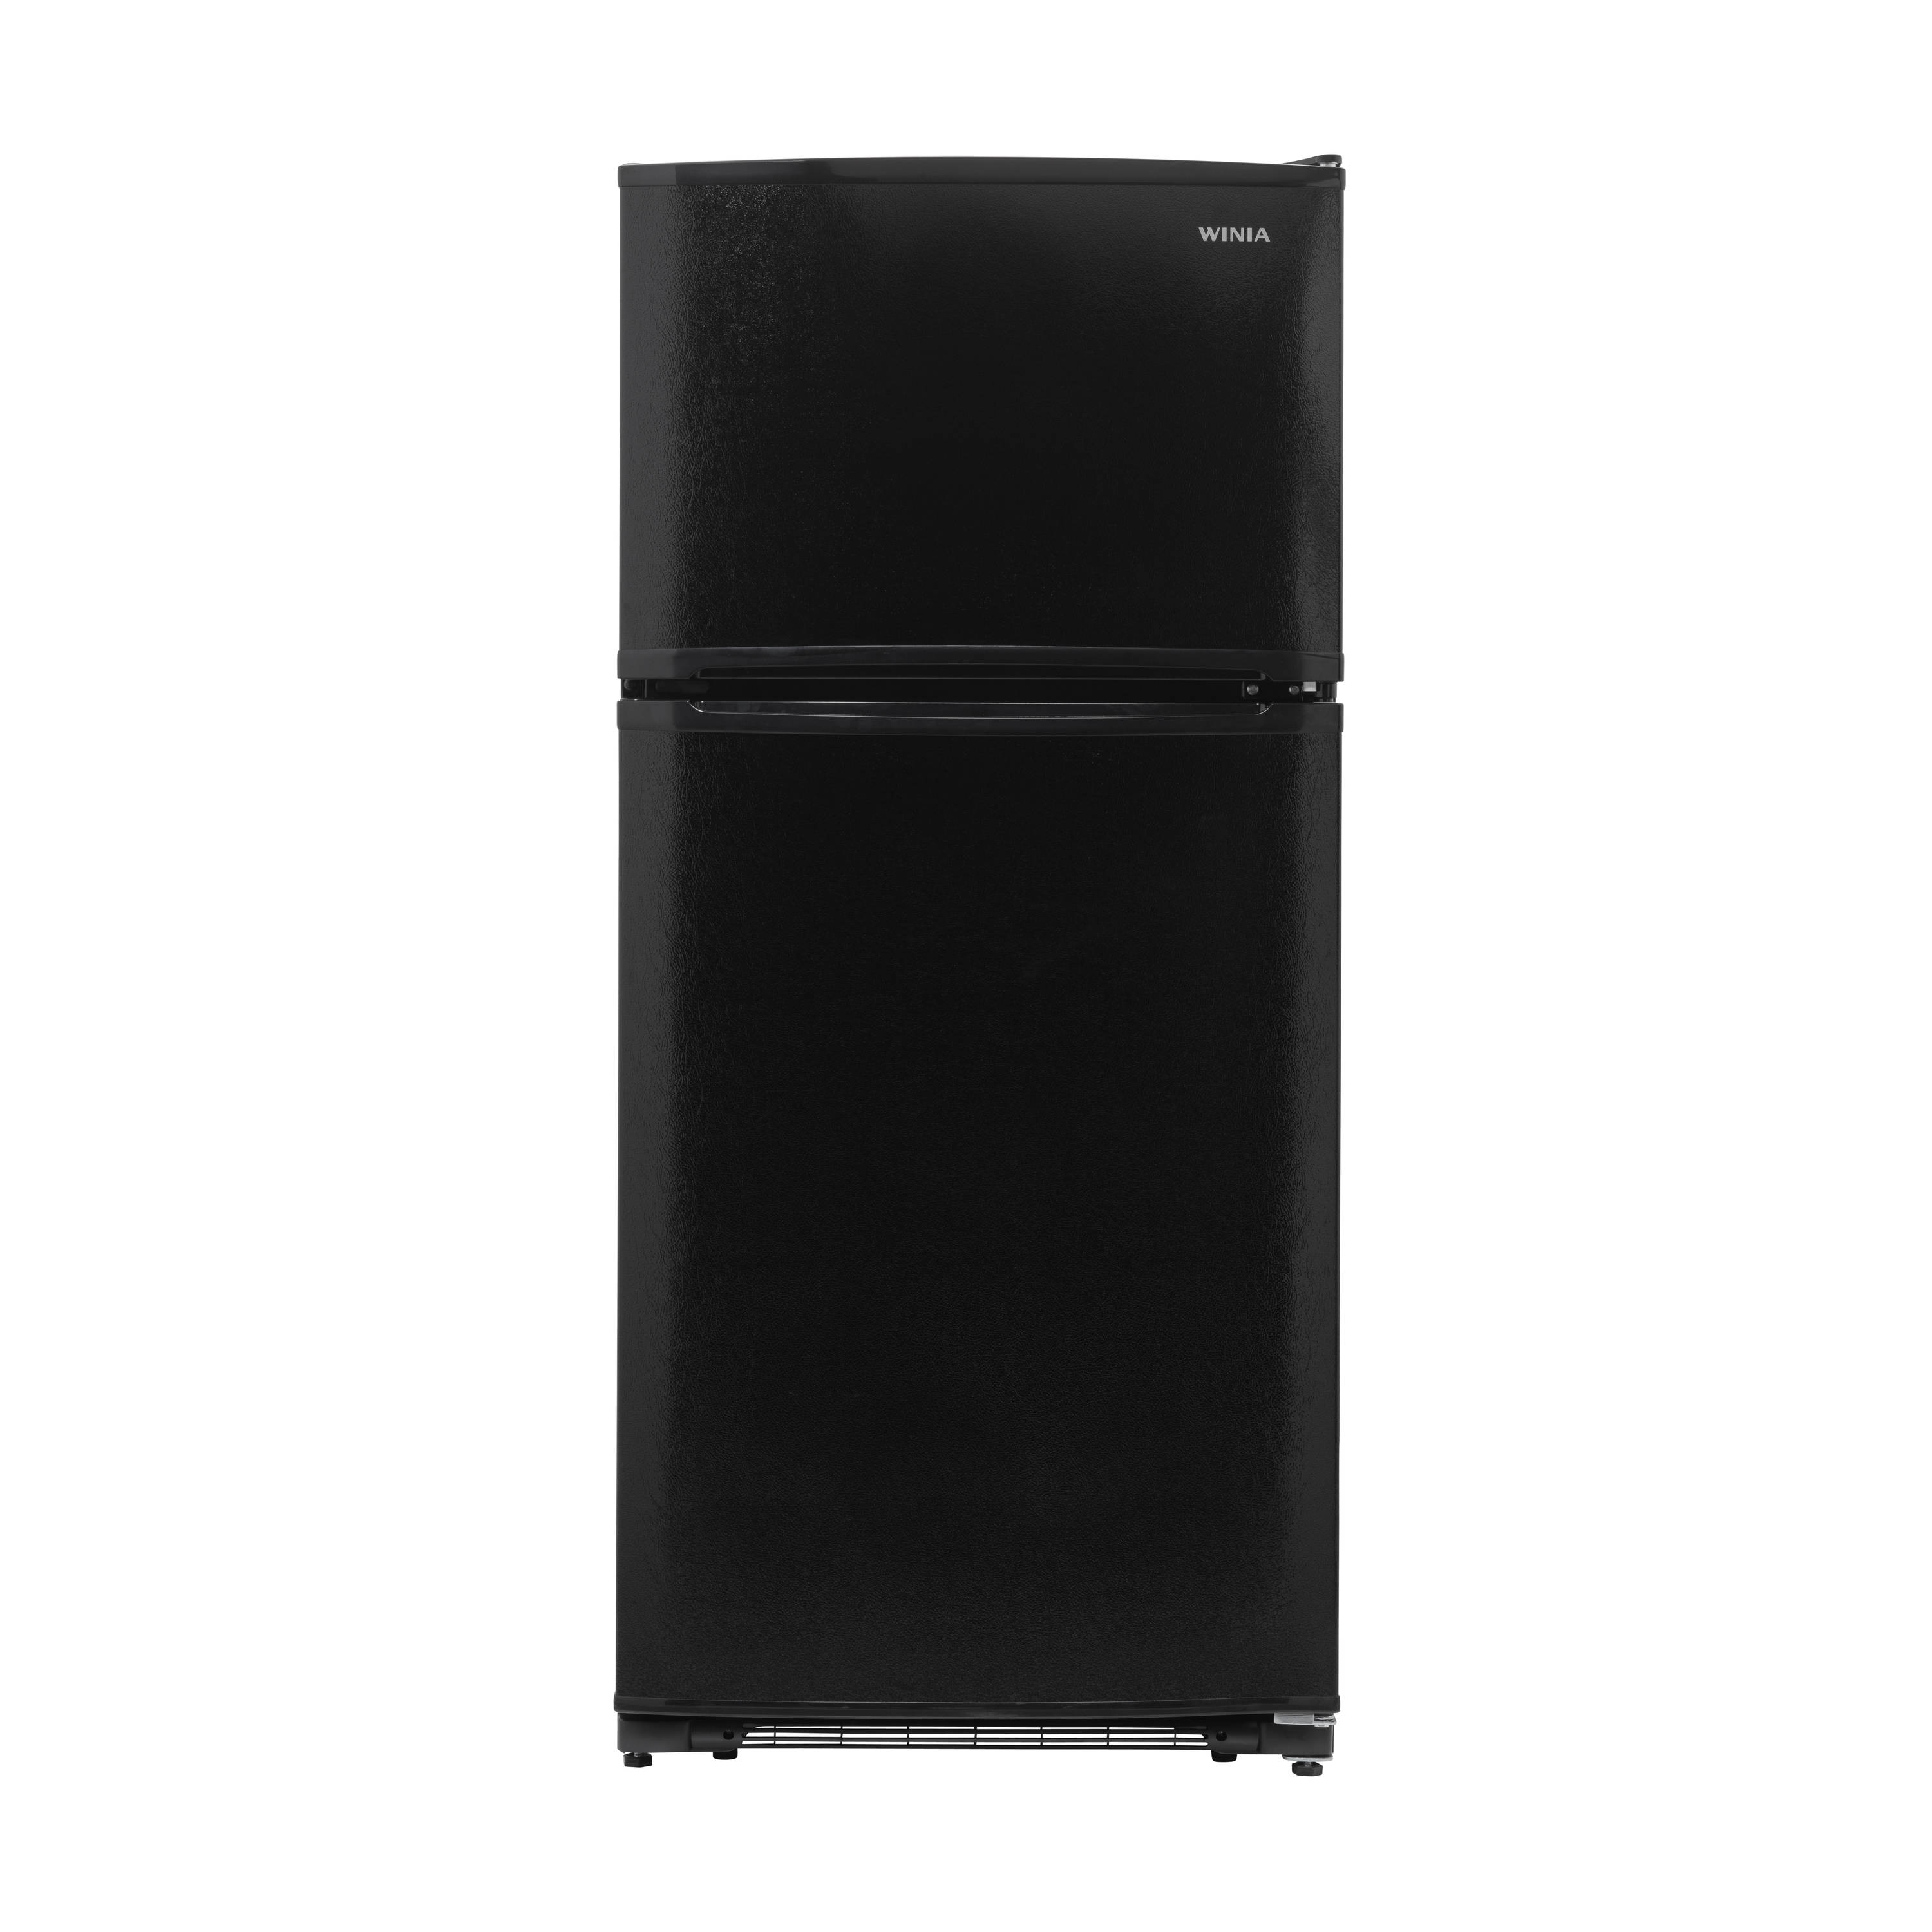 WRTG18HBWCD by Winia - 18.3 cu. ft. Top Mount Refrigerator - White